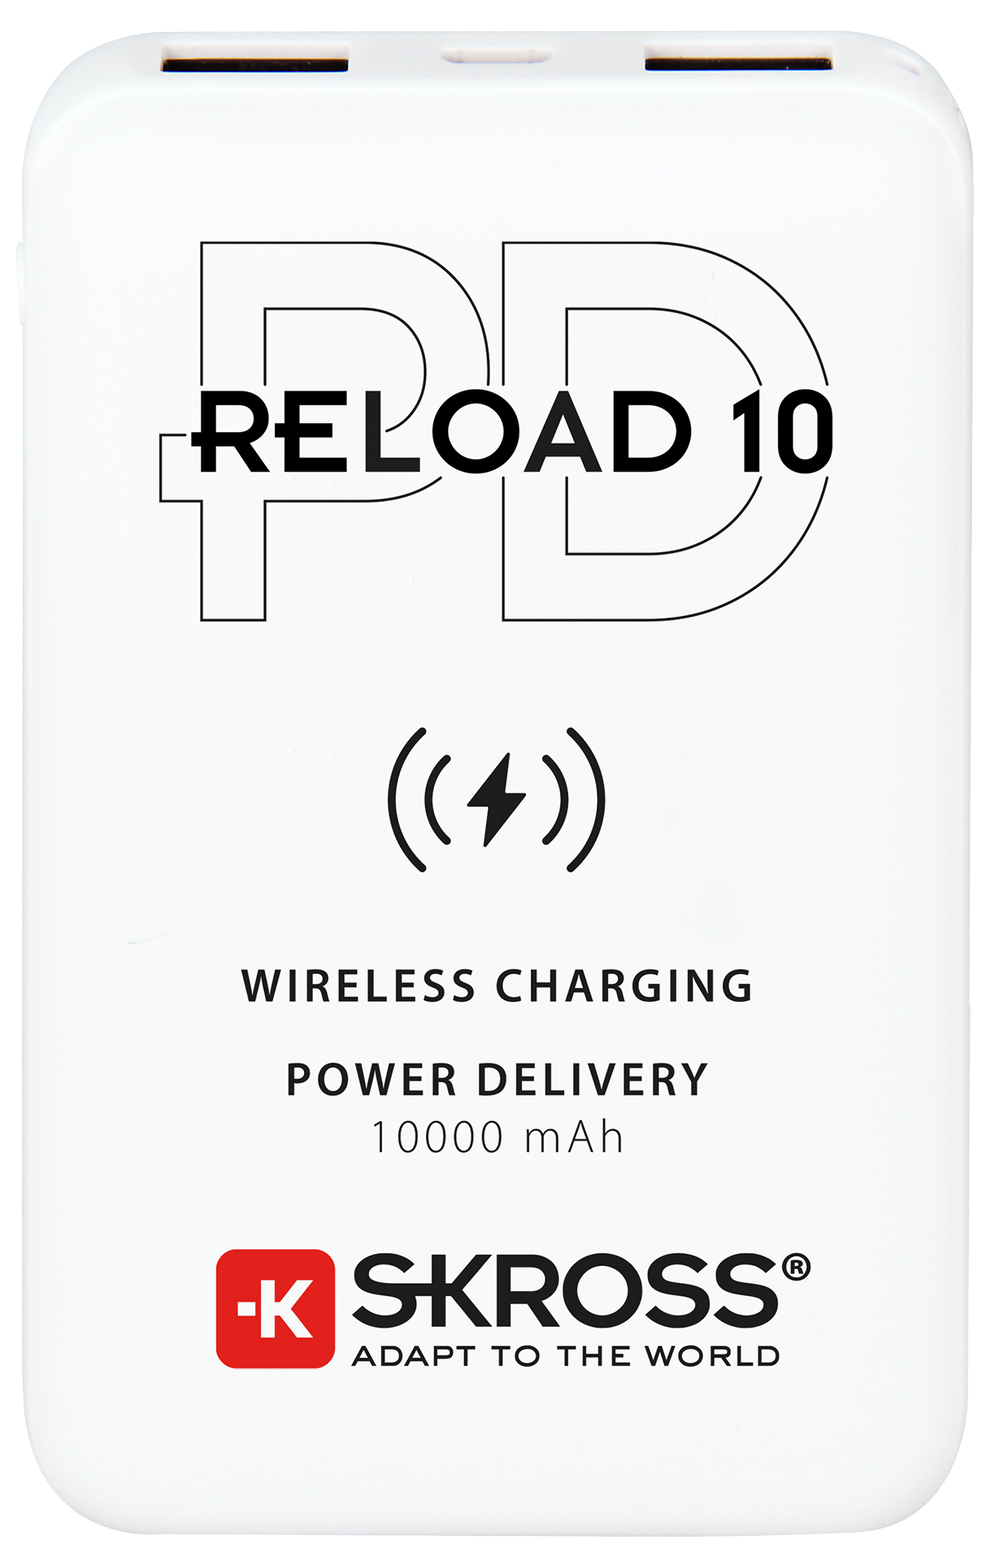 Skross 10,000 mAh Power Bank with Wireless Charging. Skross Reload 10 Qi PD